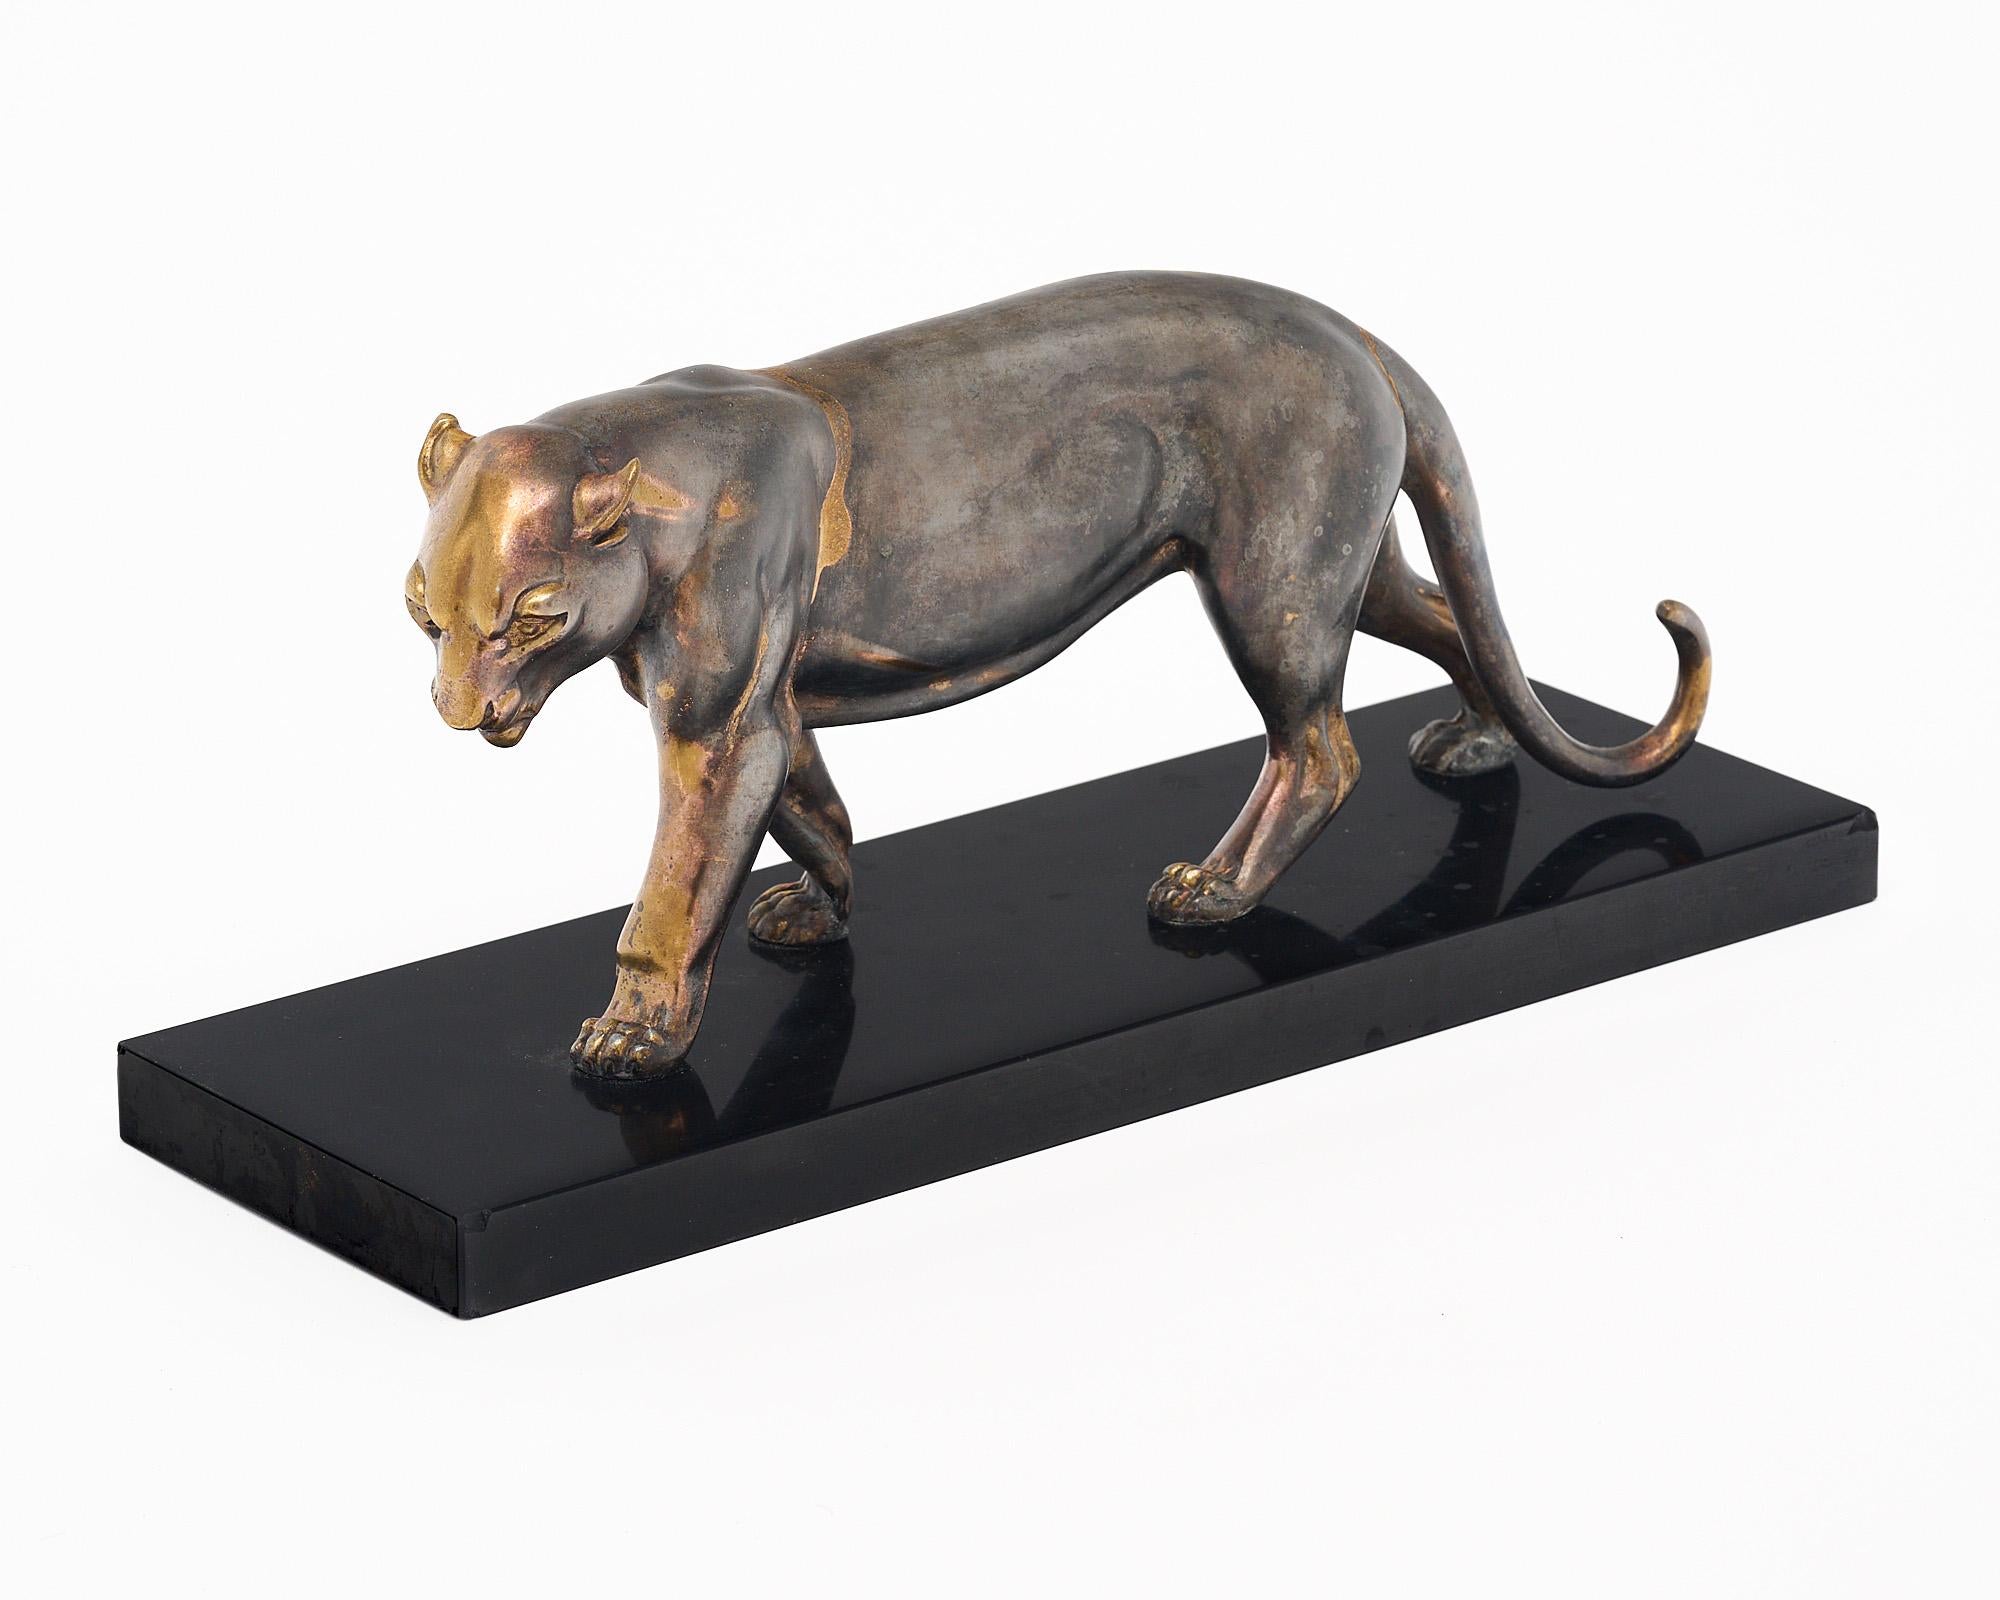 Sculpture of a panther from Art Deco period France made of metal with a black marble base. This figure is in a natural walking pose and is quite eye catching. It features the original patina consistent with use and age.